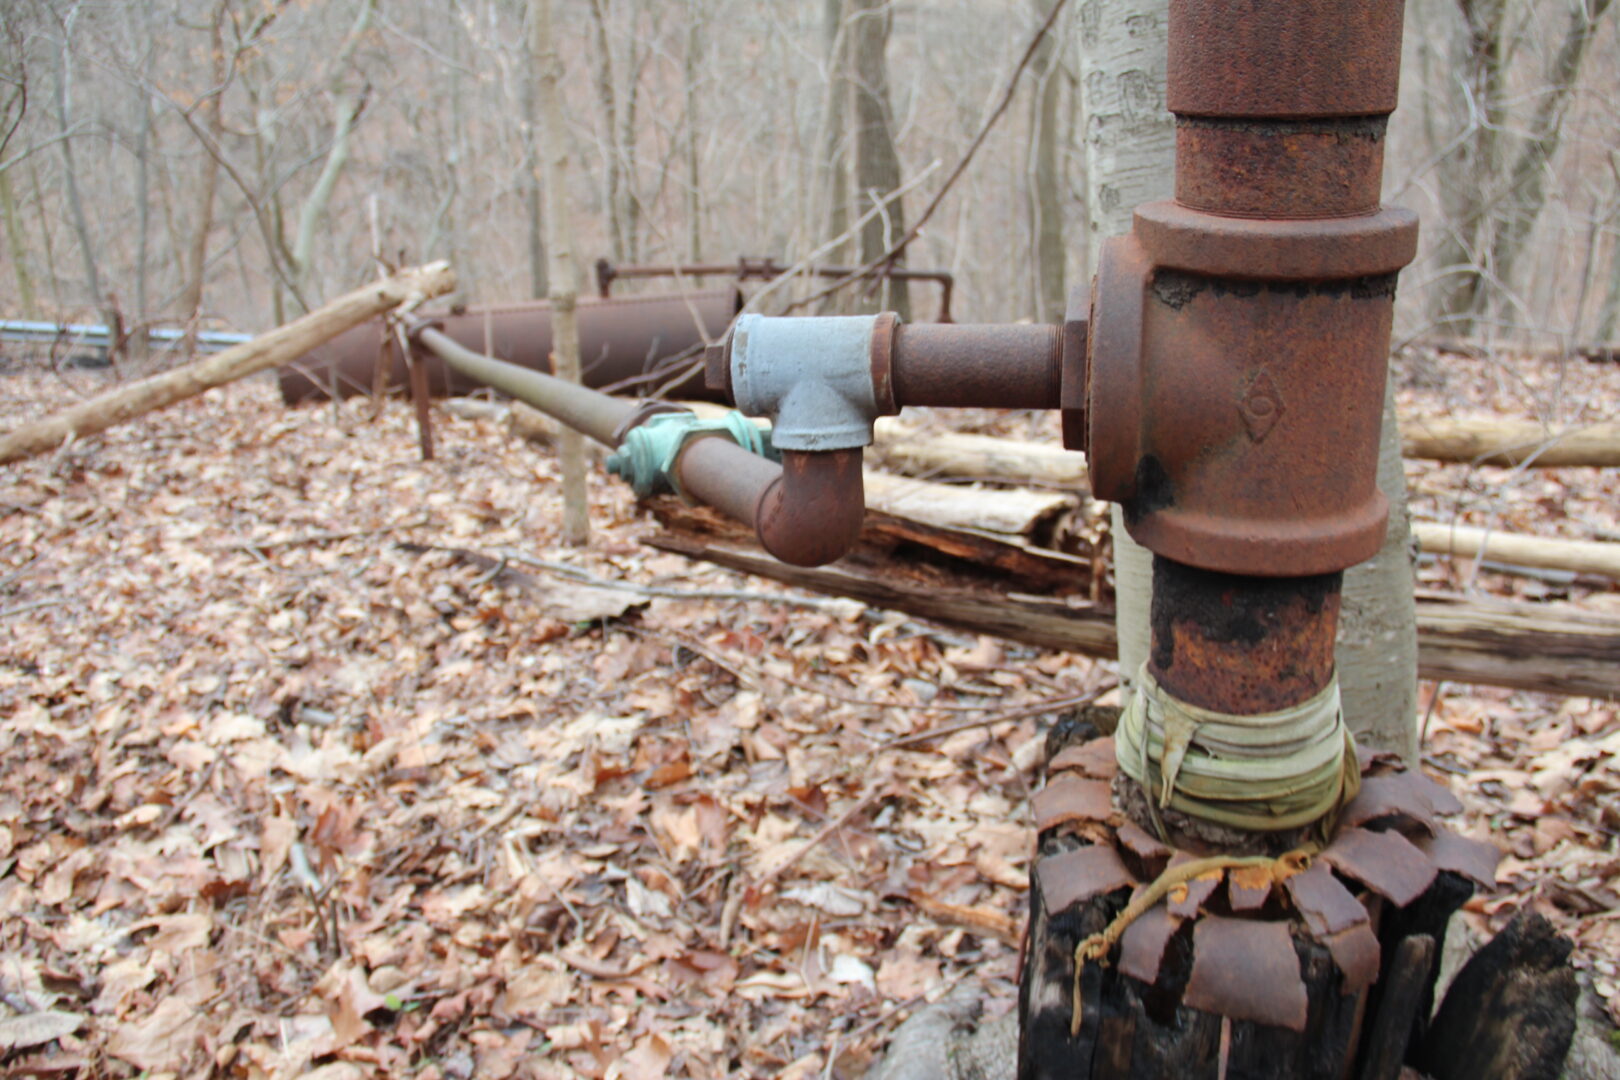 An abandoned gas well at the Ohio township, Allegheny County property of Ed and Mary Vojtas.